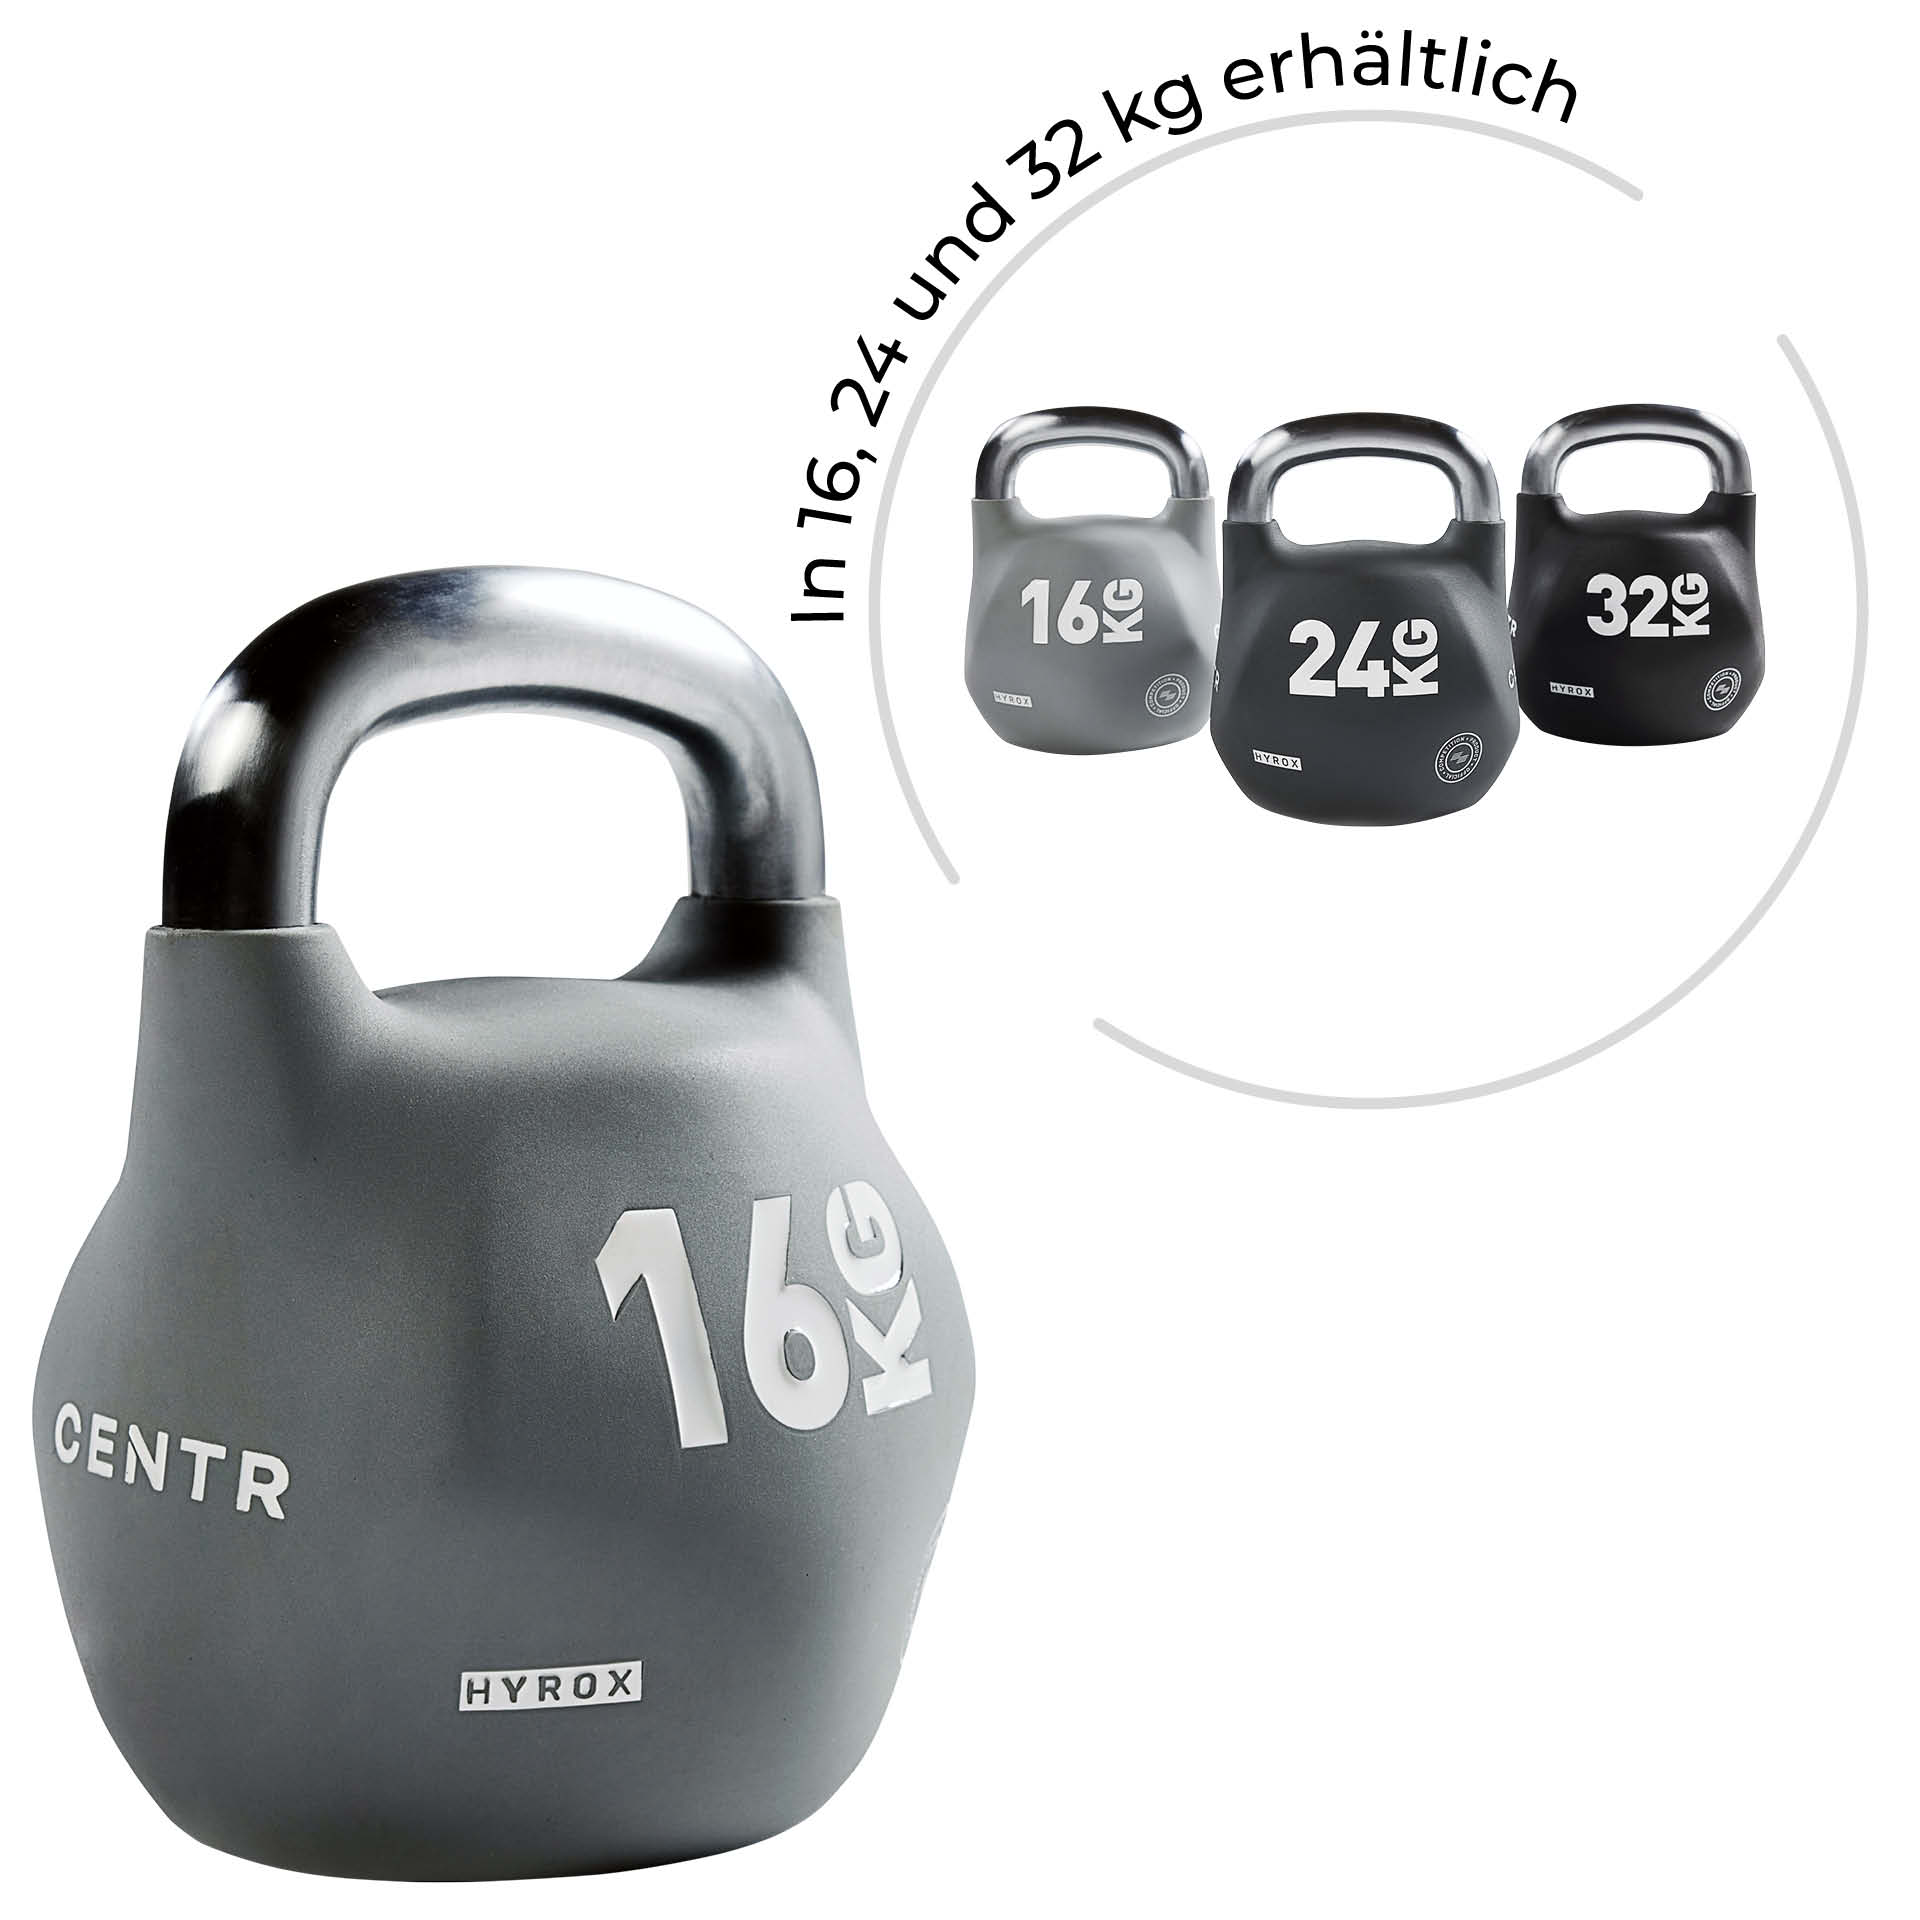 CENTR x HYROX Competition Octo Kettlebell 